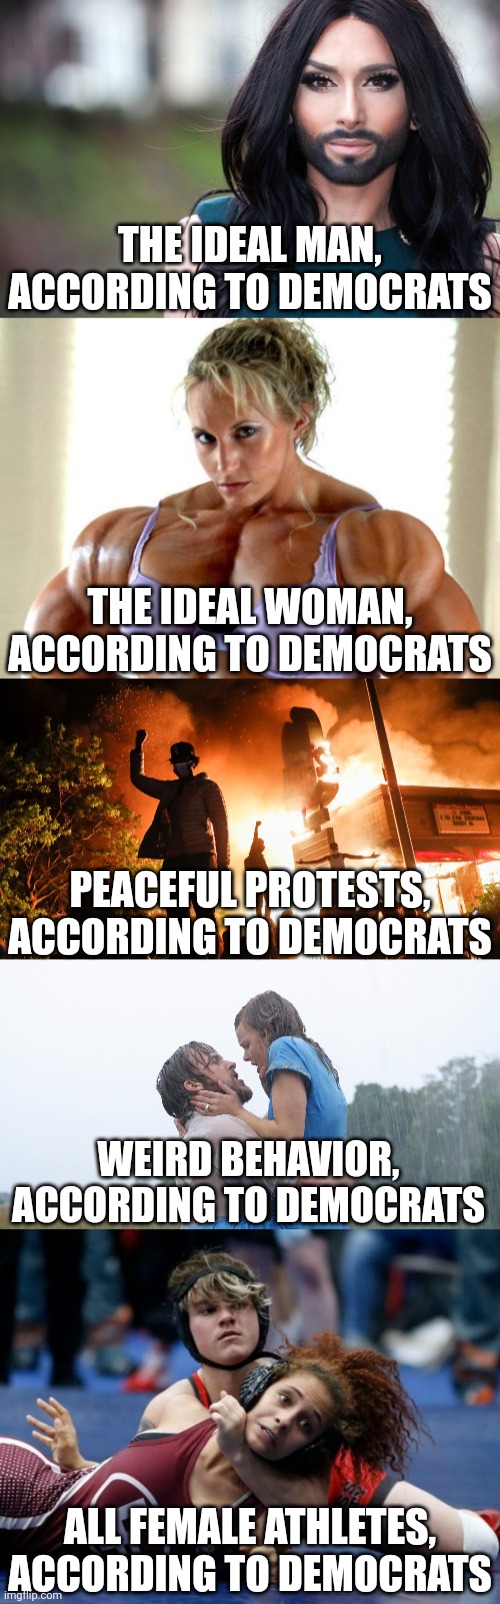 Hmmm.... I am seeing a pattern here.... | THE IDEAL MAN, ACCORDING TO DEMOCRATS; THE IDEAL WOMAN, ACCORDING TO DEMOCRATS; PEACEFUL PROTESTS, ACCORDING TO DEMOCRATS; WEIRD BEHAVIOR, ACCORDING TO DEMOCRATS; ALL FEMALE ATHLETES, ACCORDING TO DEMOCRATS | image tagged in transexual,muscle woman,blm riots,kiss for bot meme,mixed wrestling,democrats | made w/ Imgflip meme maker